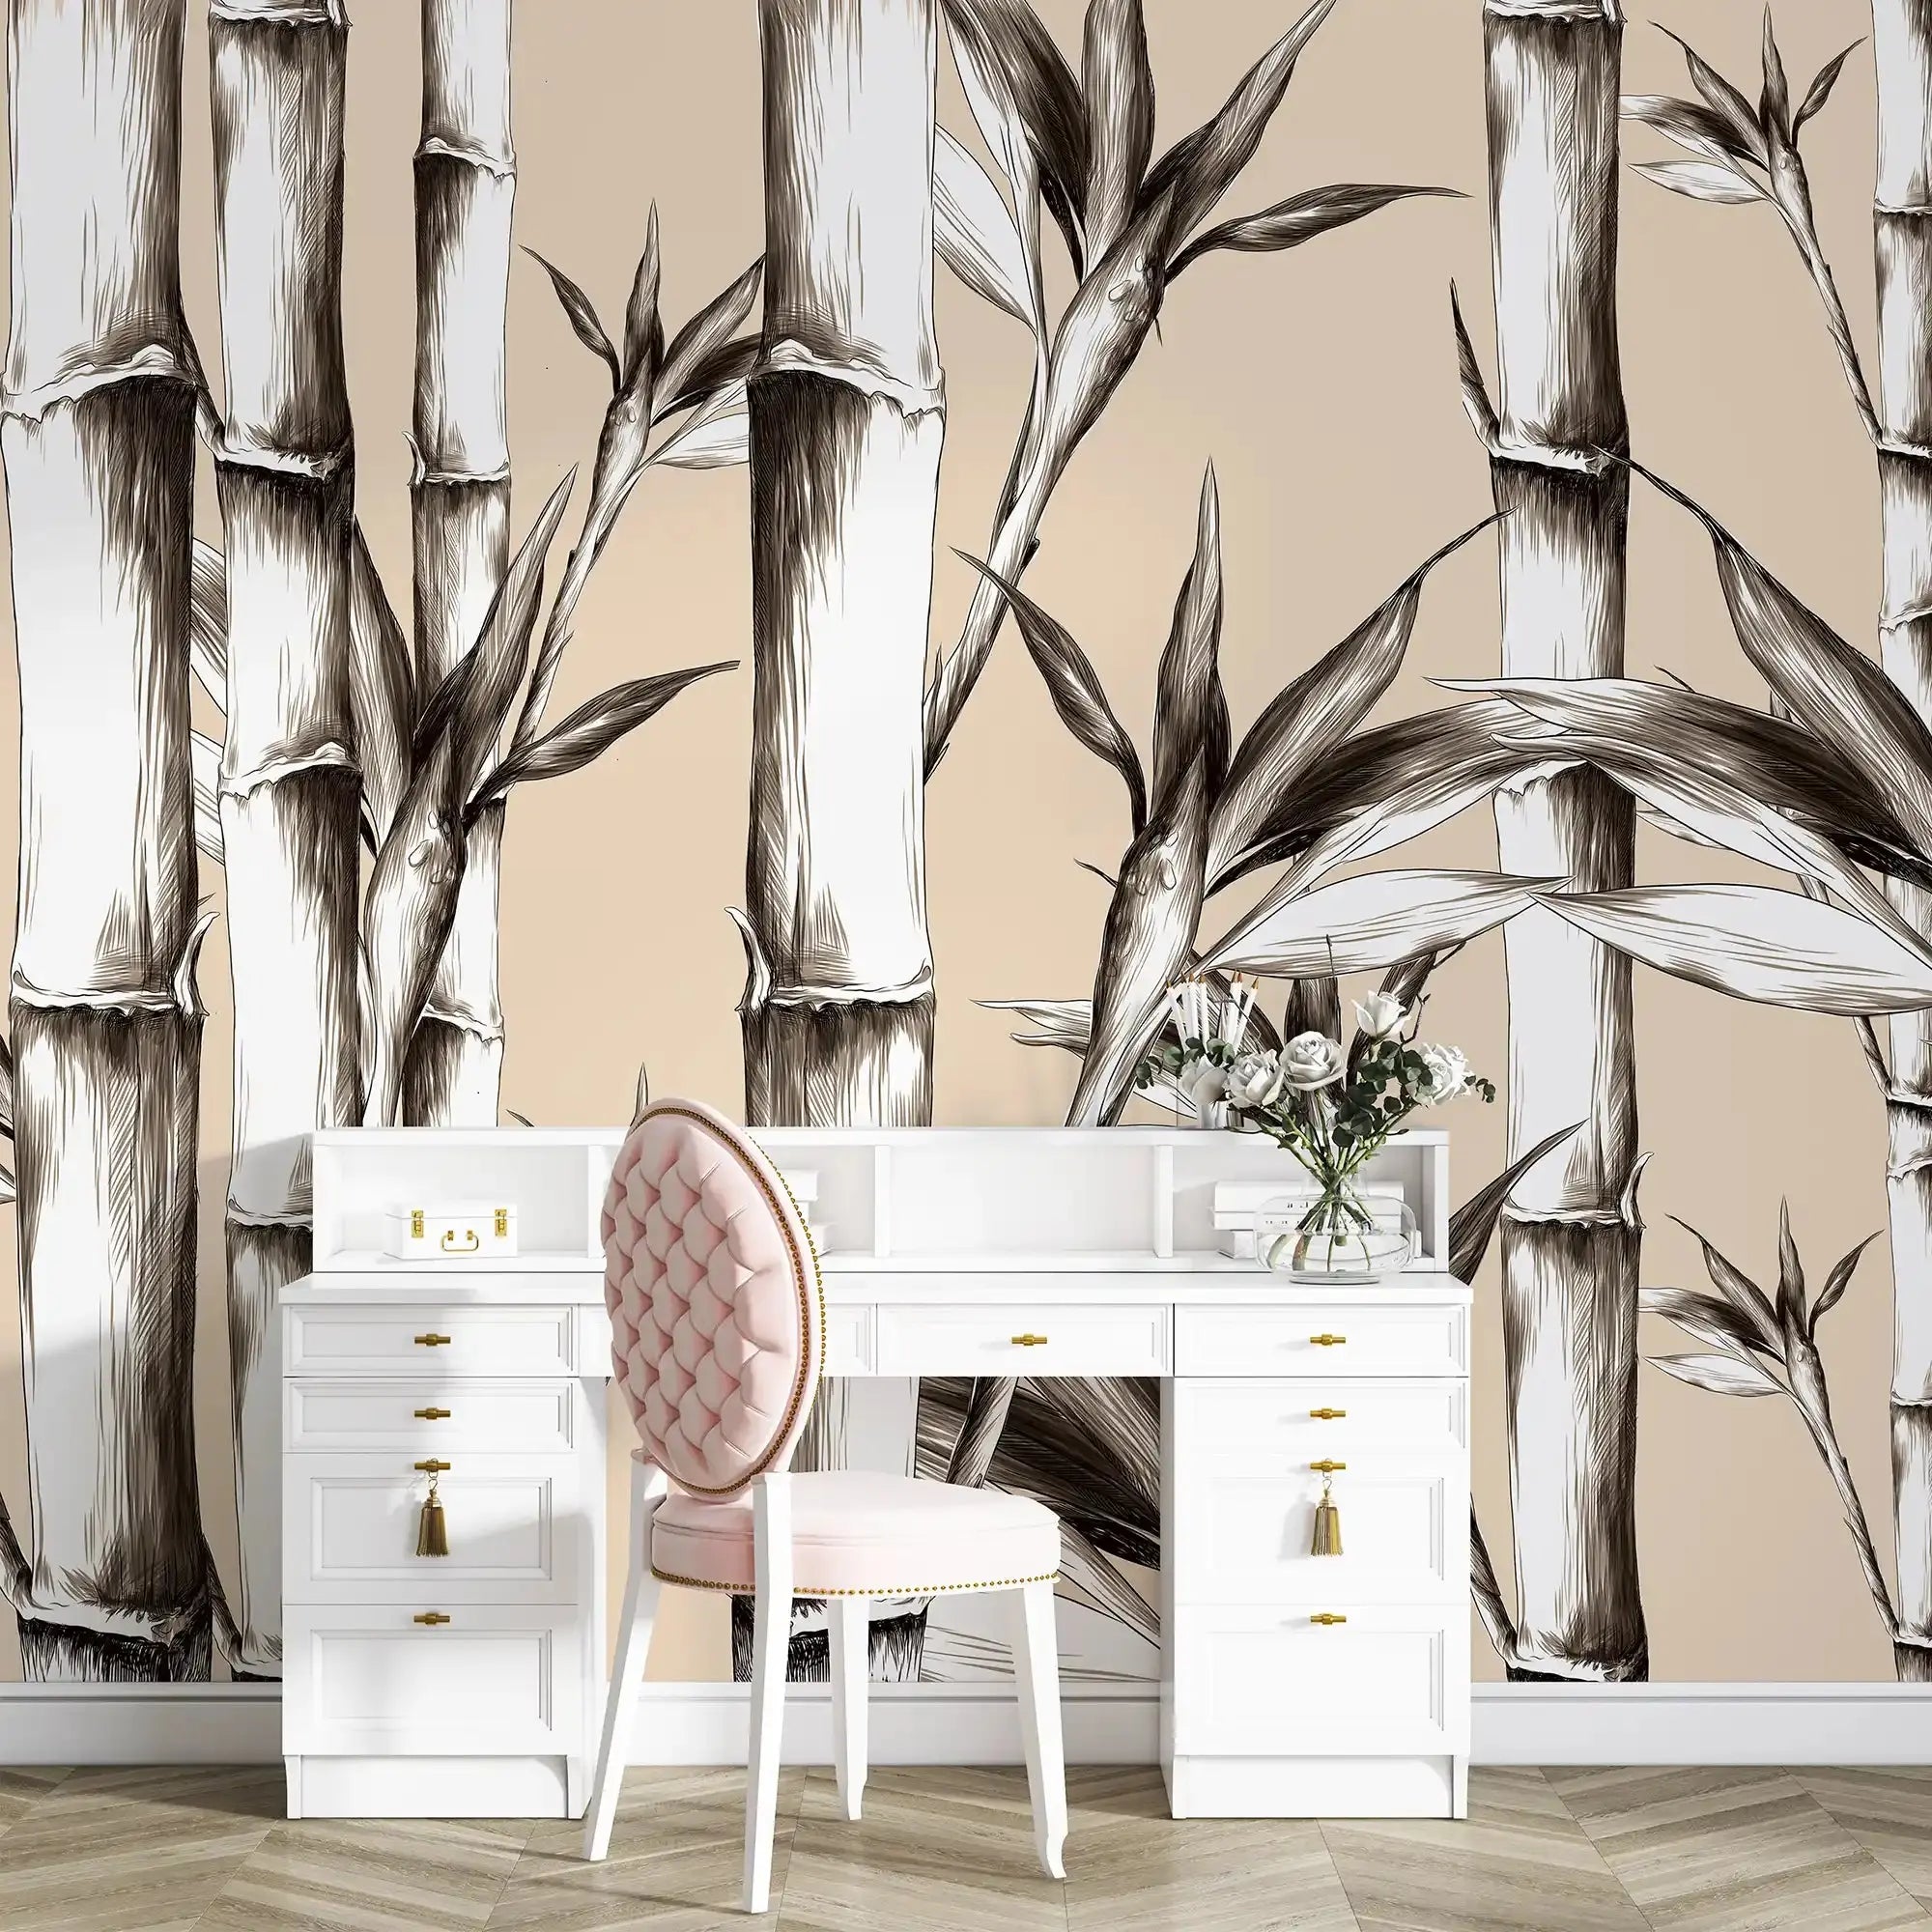 3098-C / Peel and Stick Wallpaper: Modern Bamboo Pattern, Easy Install for Kitchen and Bathroom, Removable Wallpaper - Artevella